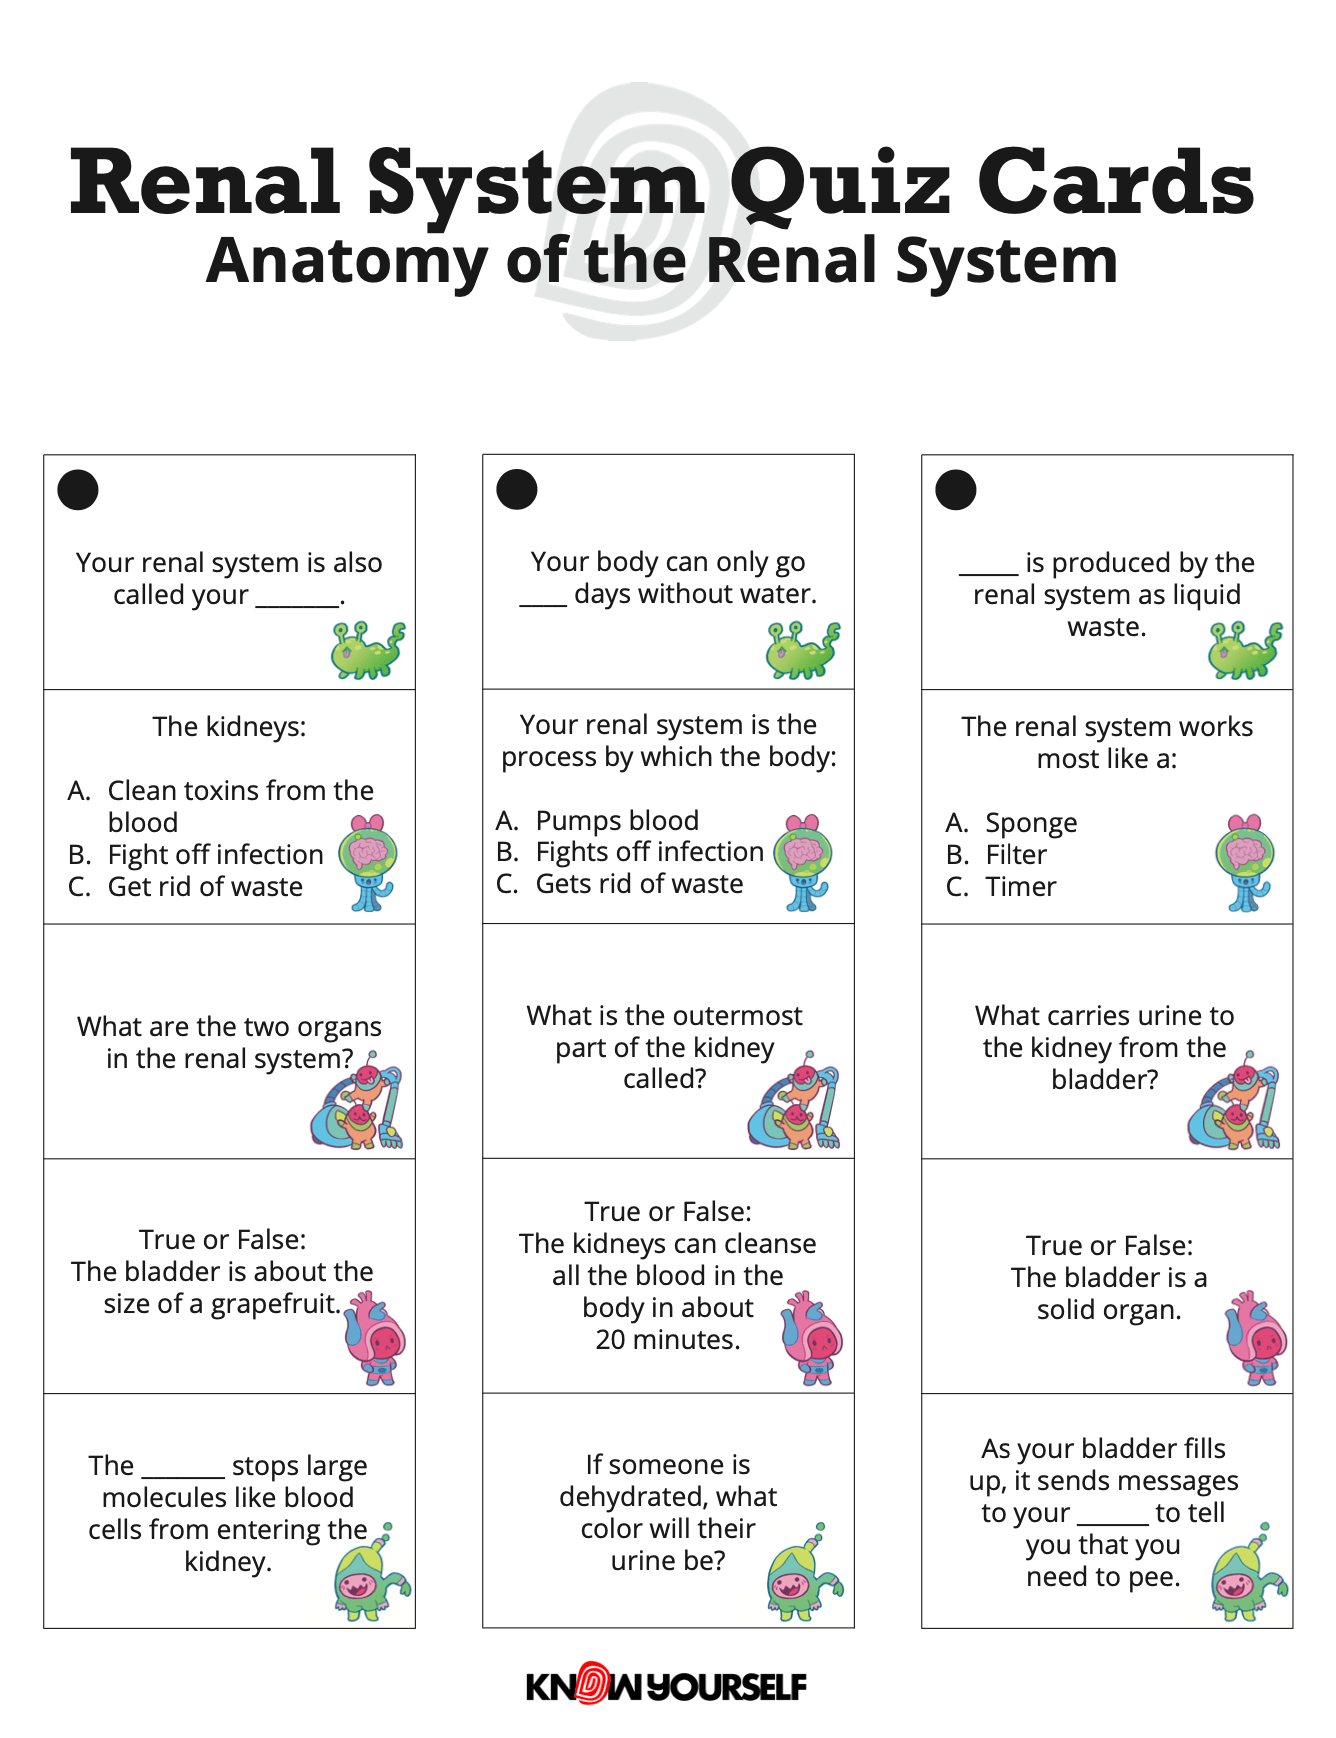 Renal System Quiz Cards Health Education for Children